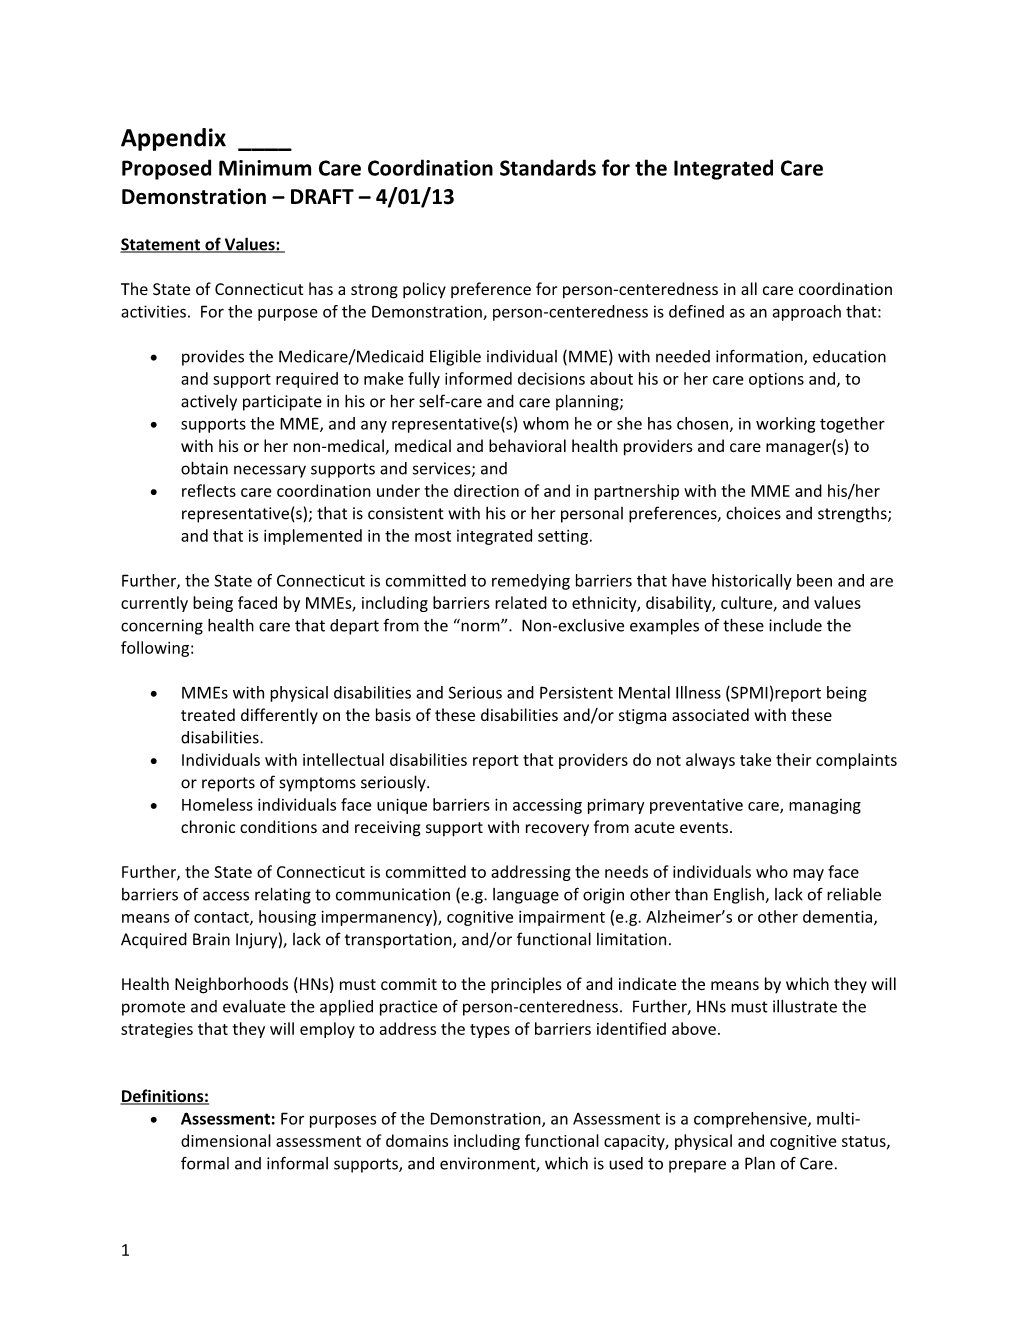 Proposed Minimum Care Coordination Standards for the Integrated Care Demonstration DRAFT